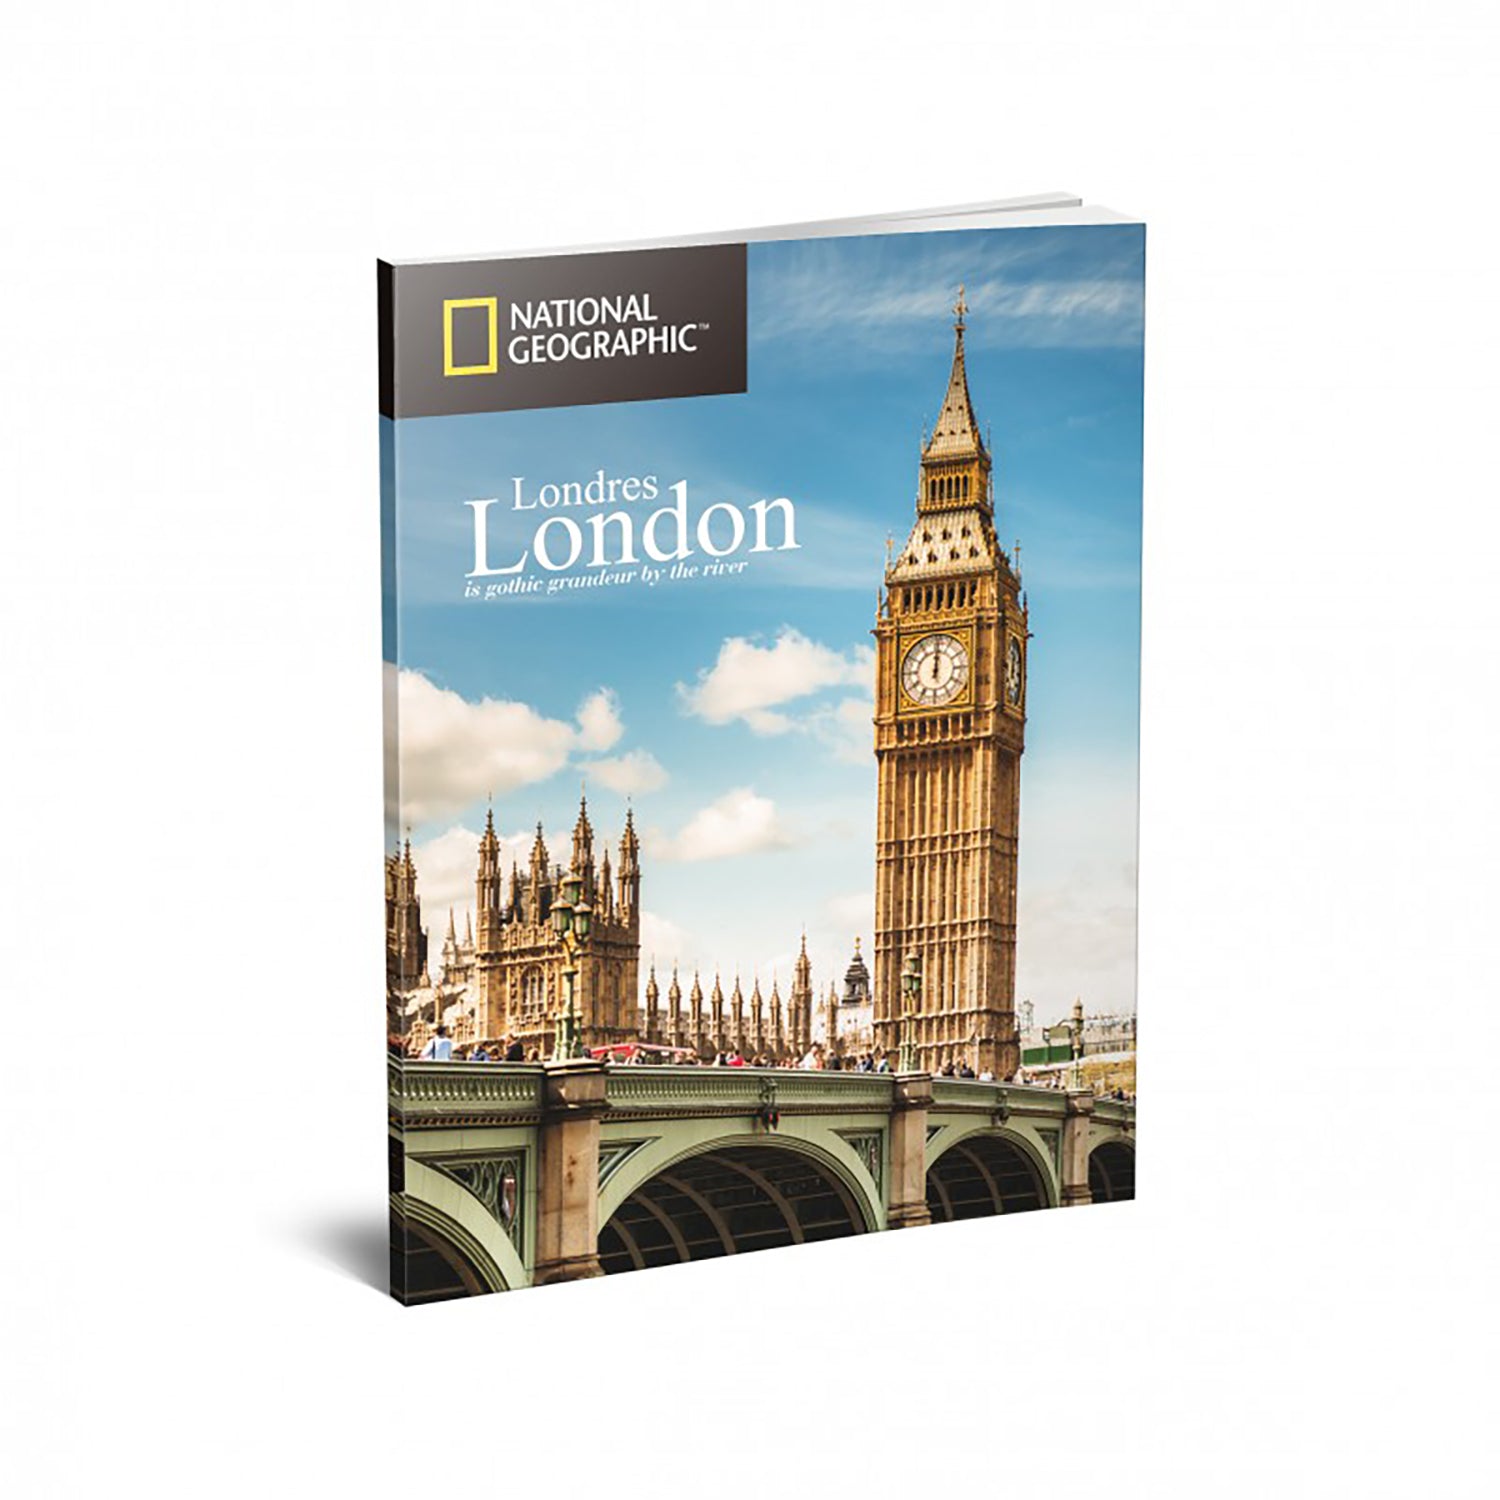 National Geographic Big Ben 3D Model and Photo Book